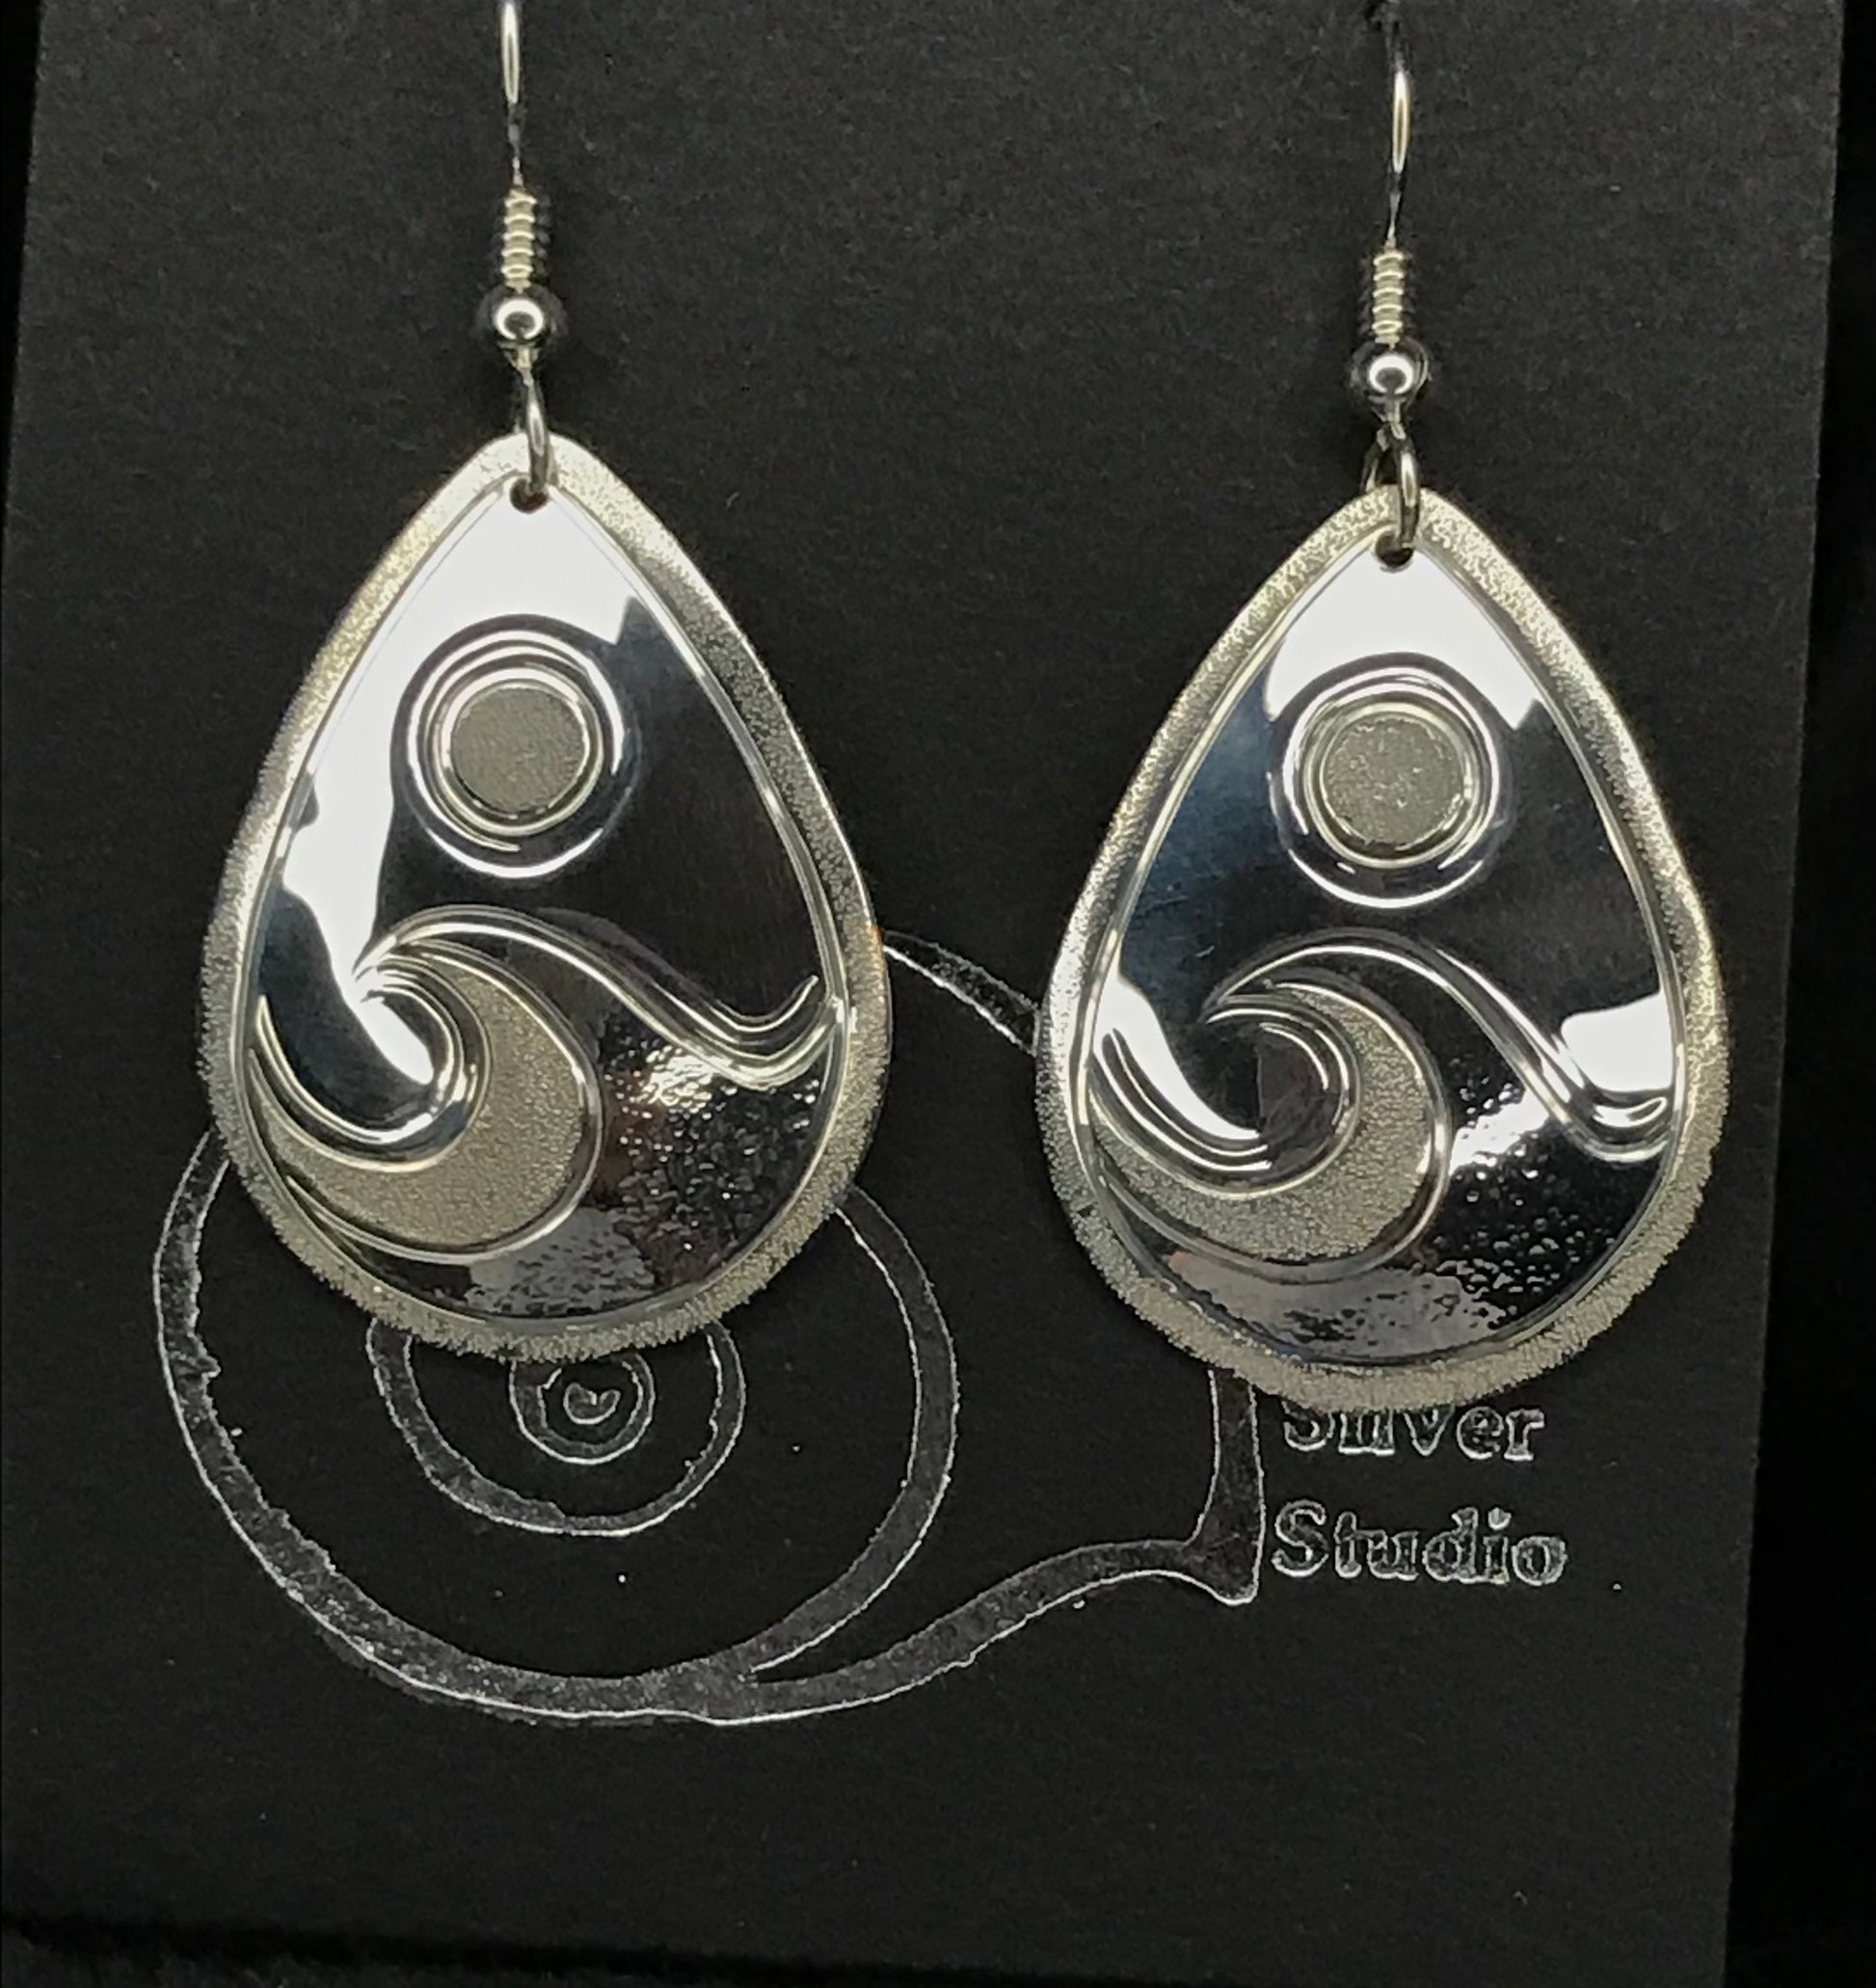 Full Moon & Waves sterling silver xlarge drops designed and engraved by Island artisan jeweller Laura Dutheil.